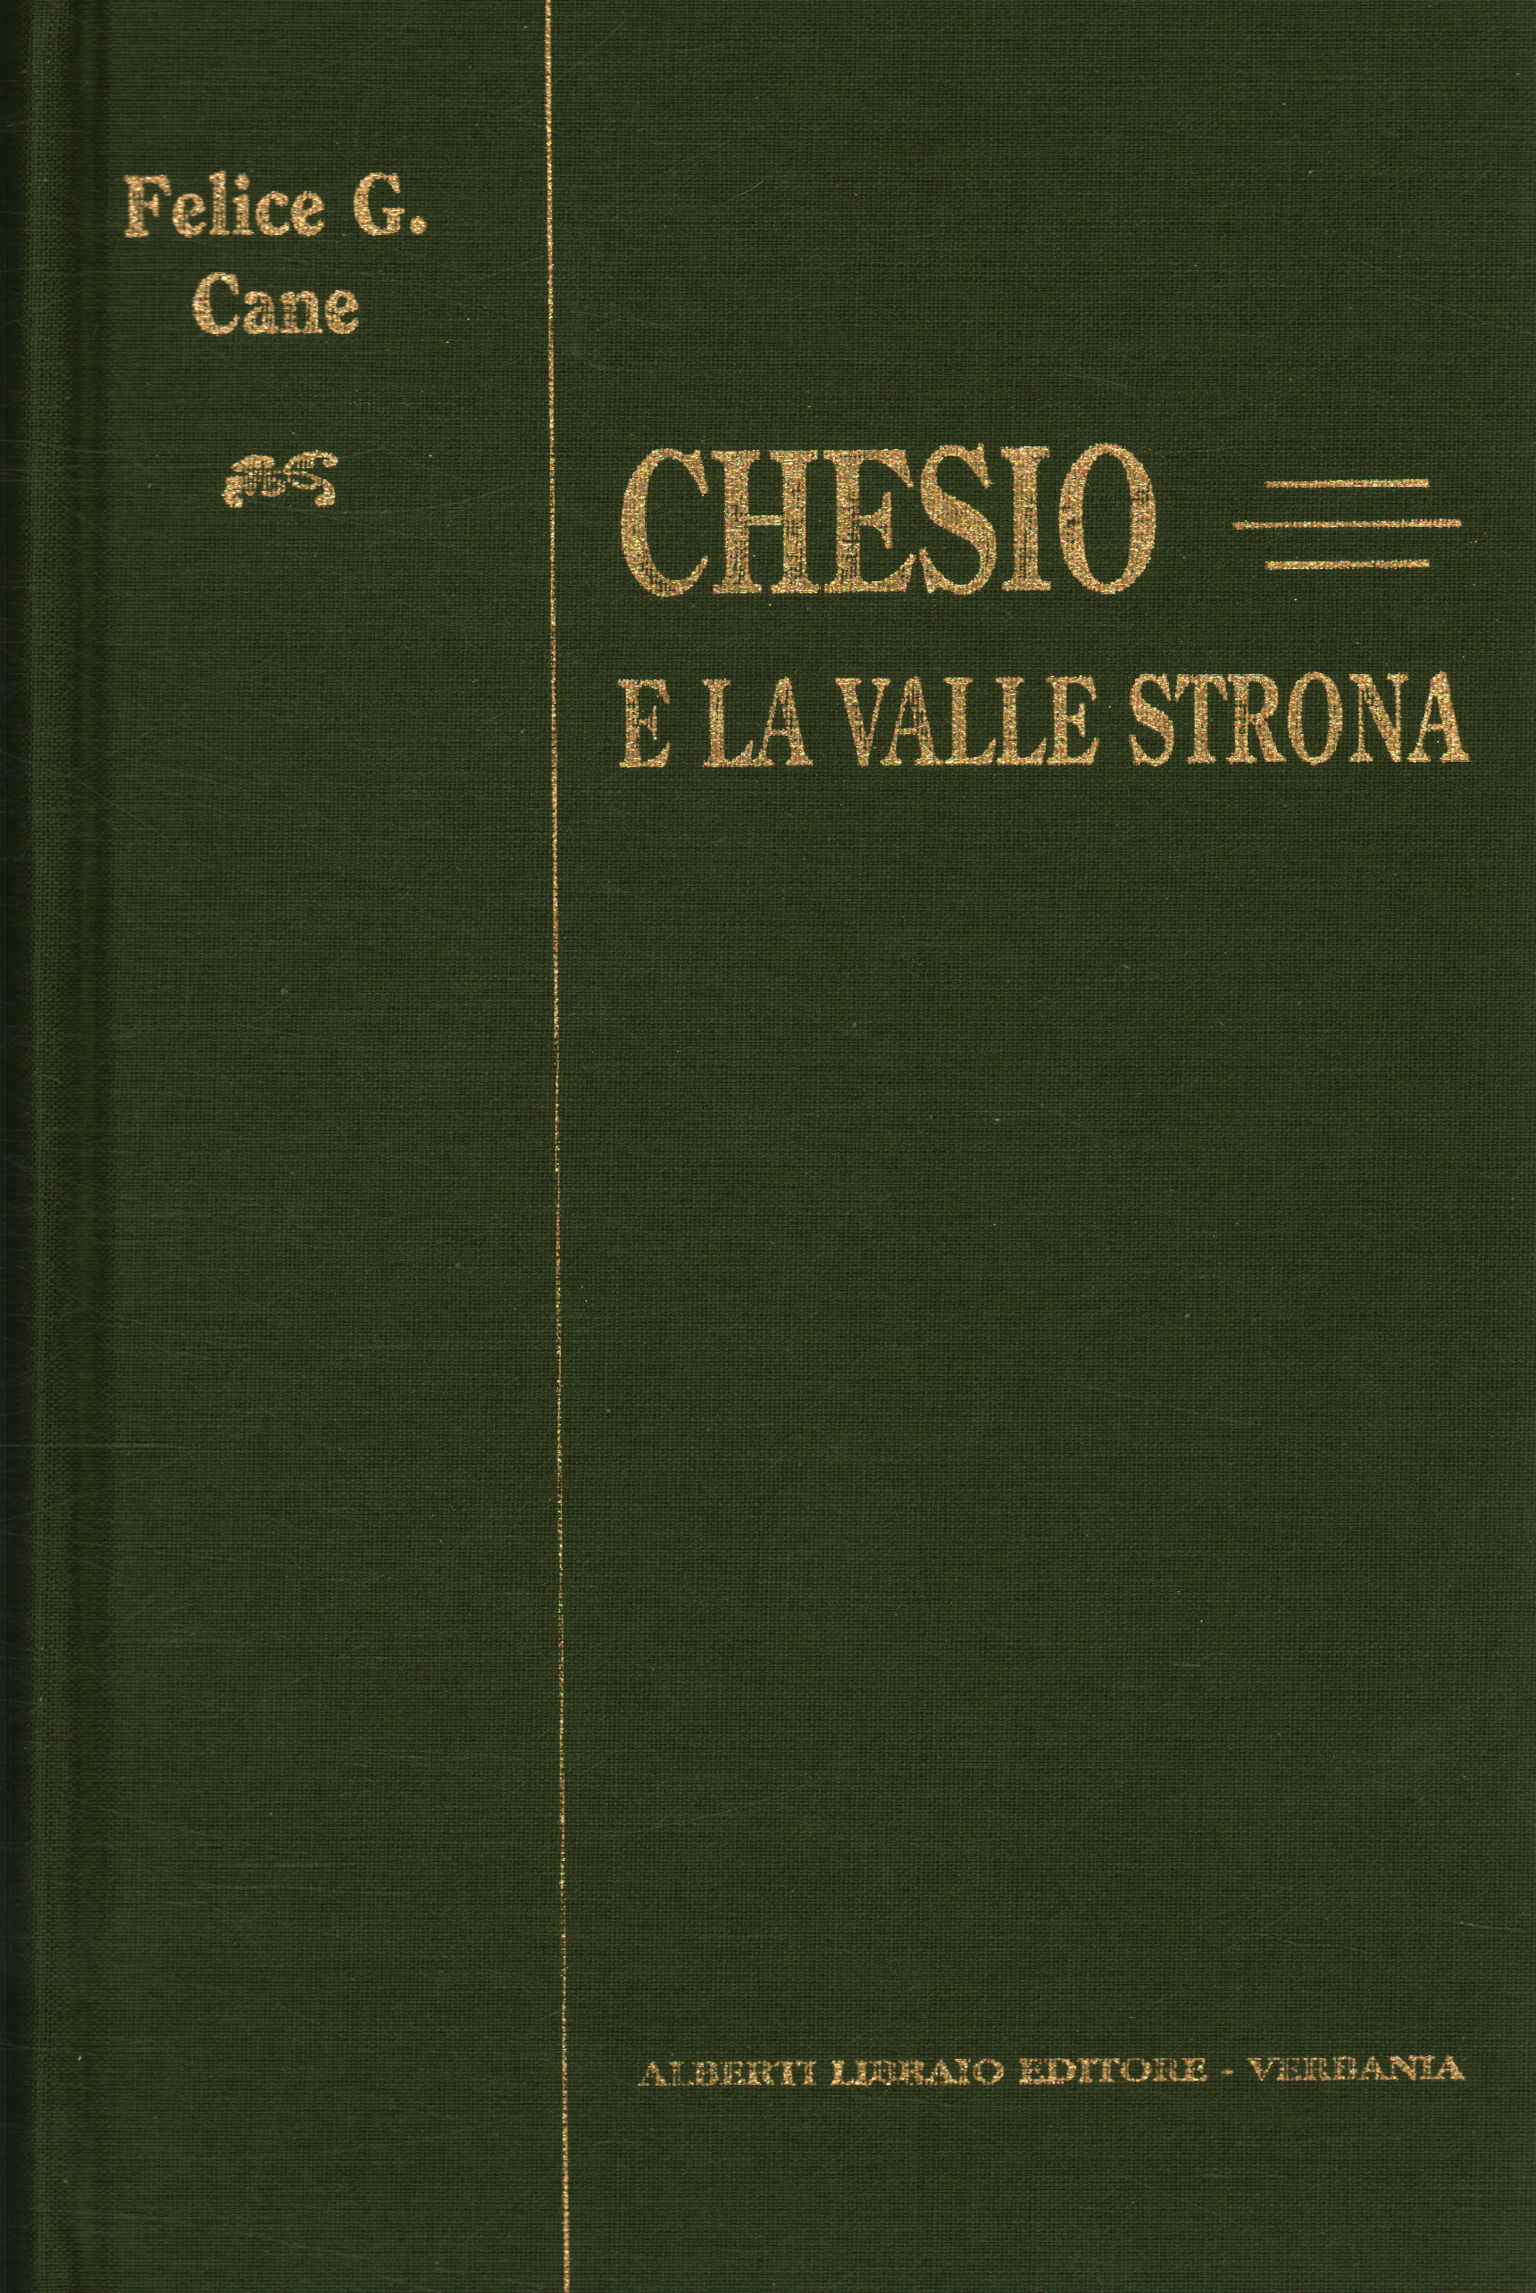 History of Chesio,History of Chesio and historical notes of